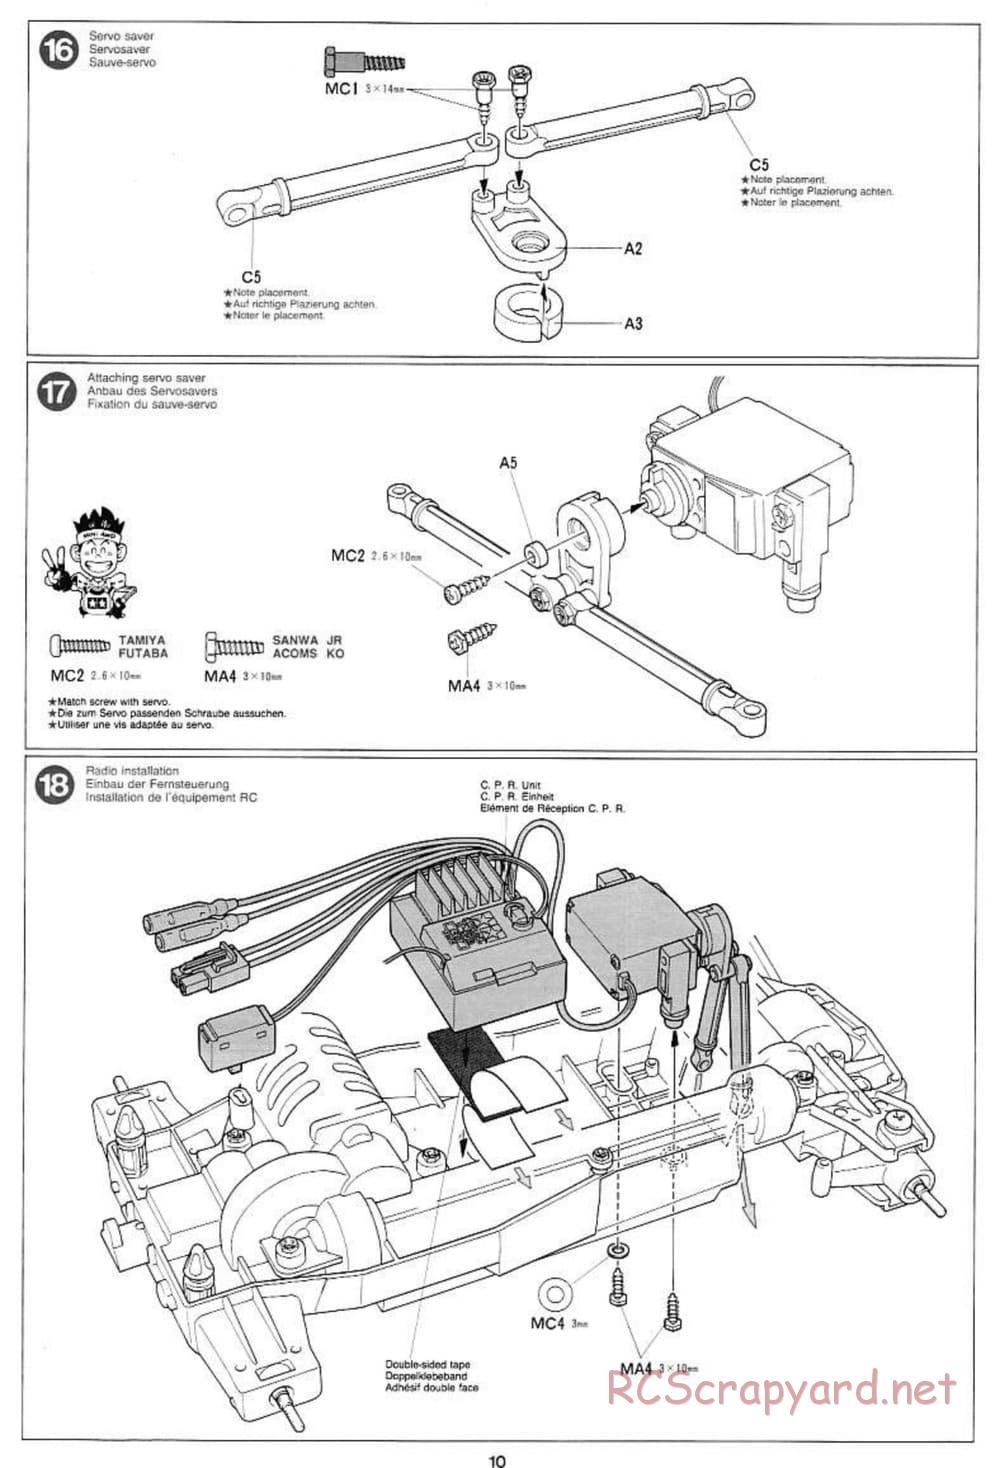 Tamiya - Wild Ceptor - Boy's 4WD Chassis - Manual - Page 10